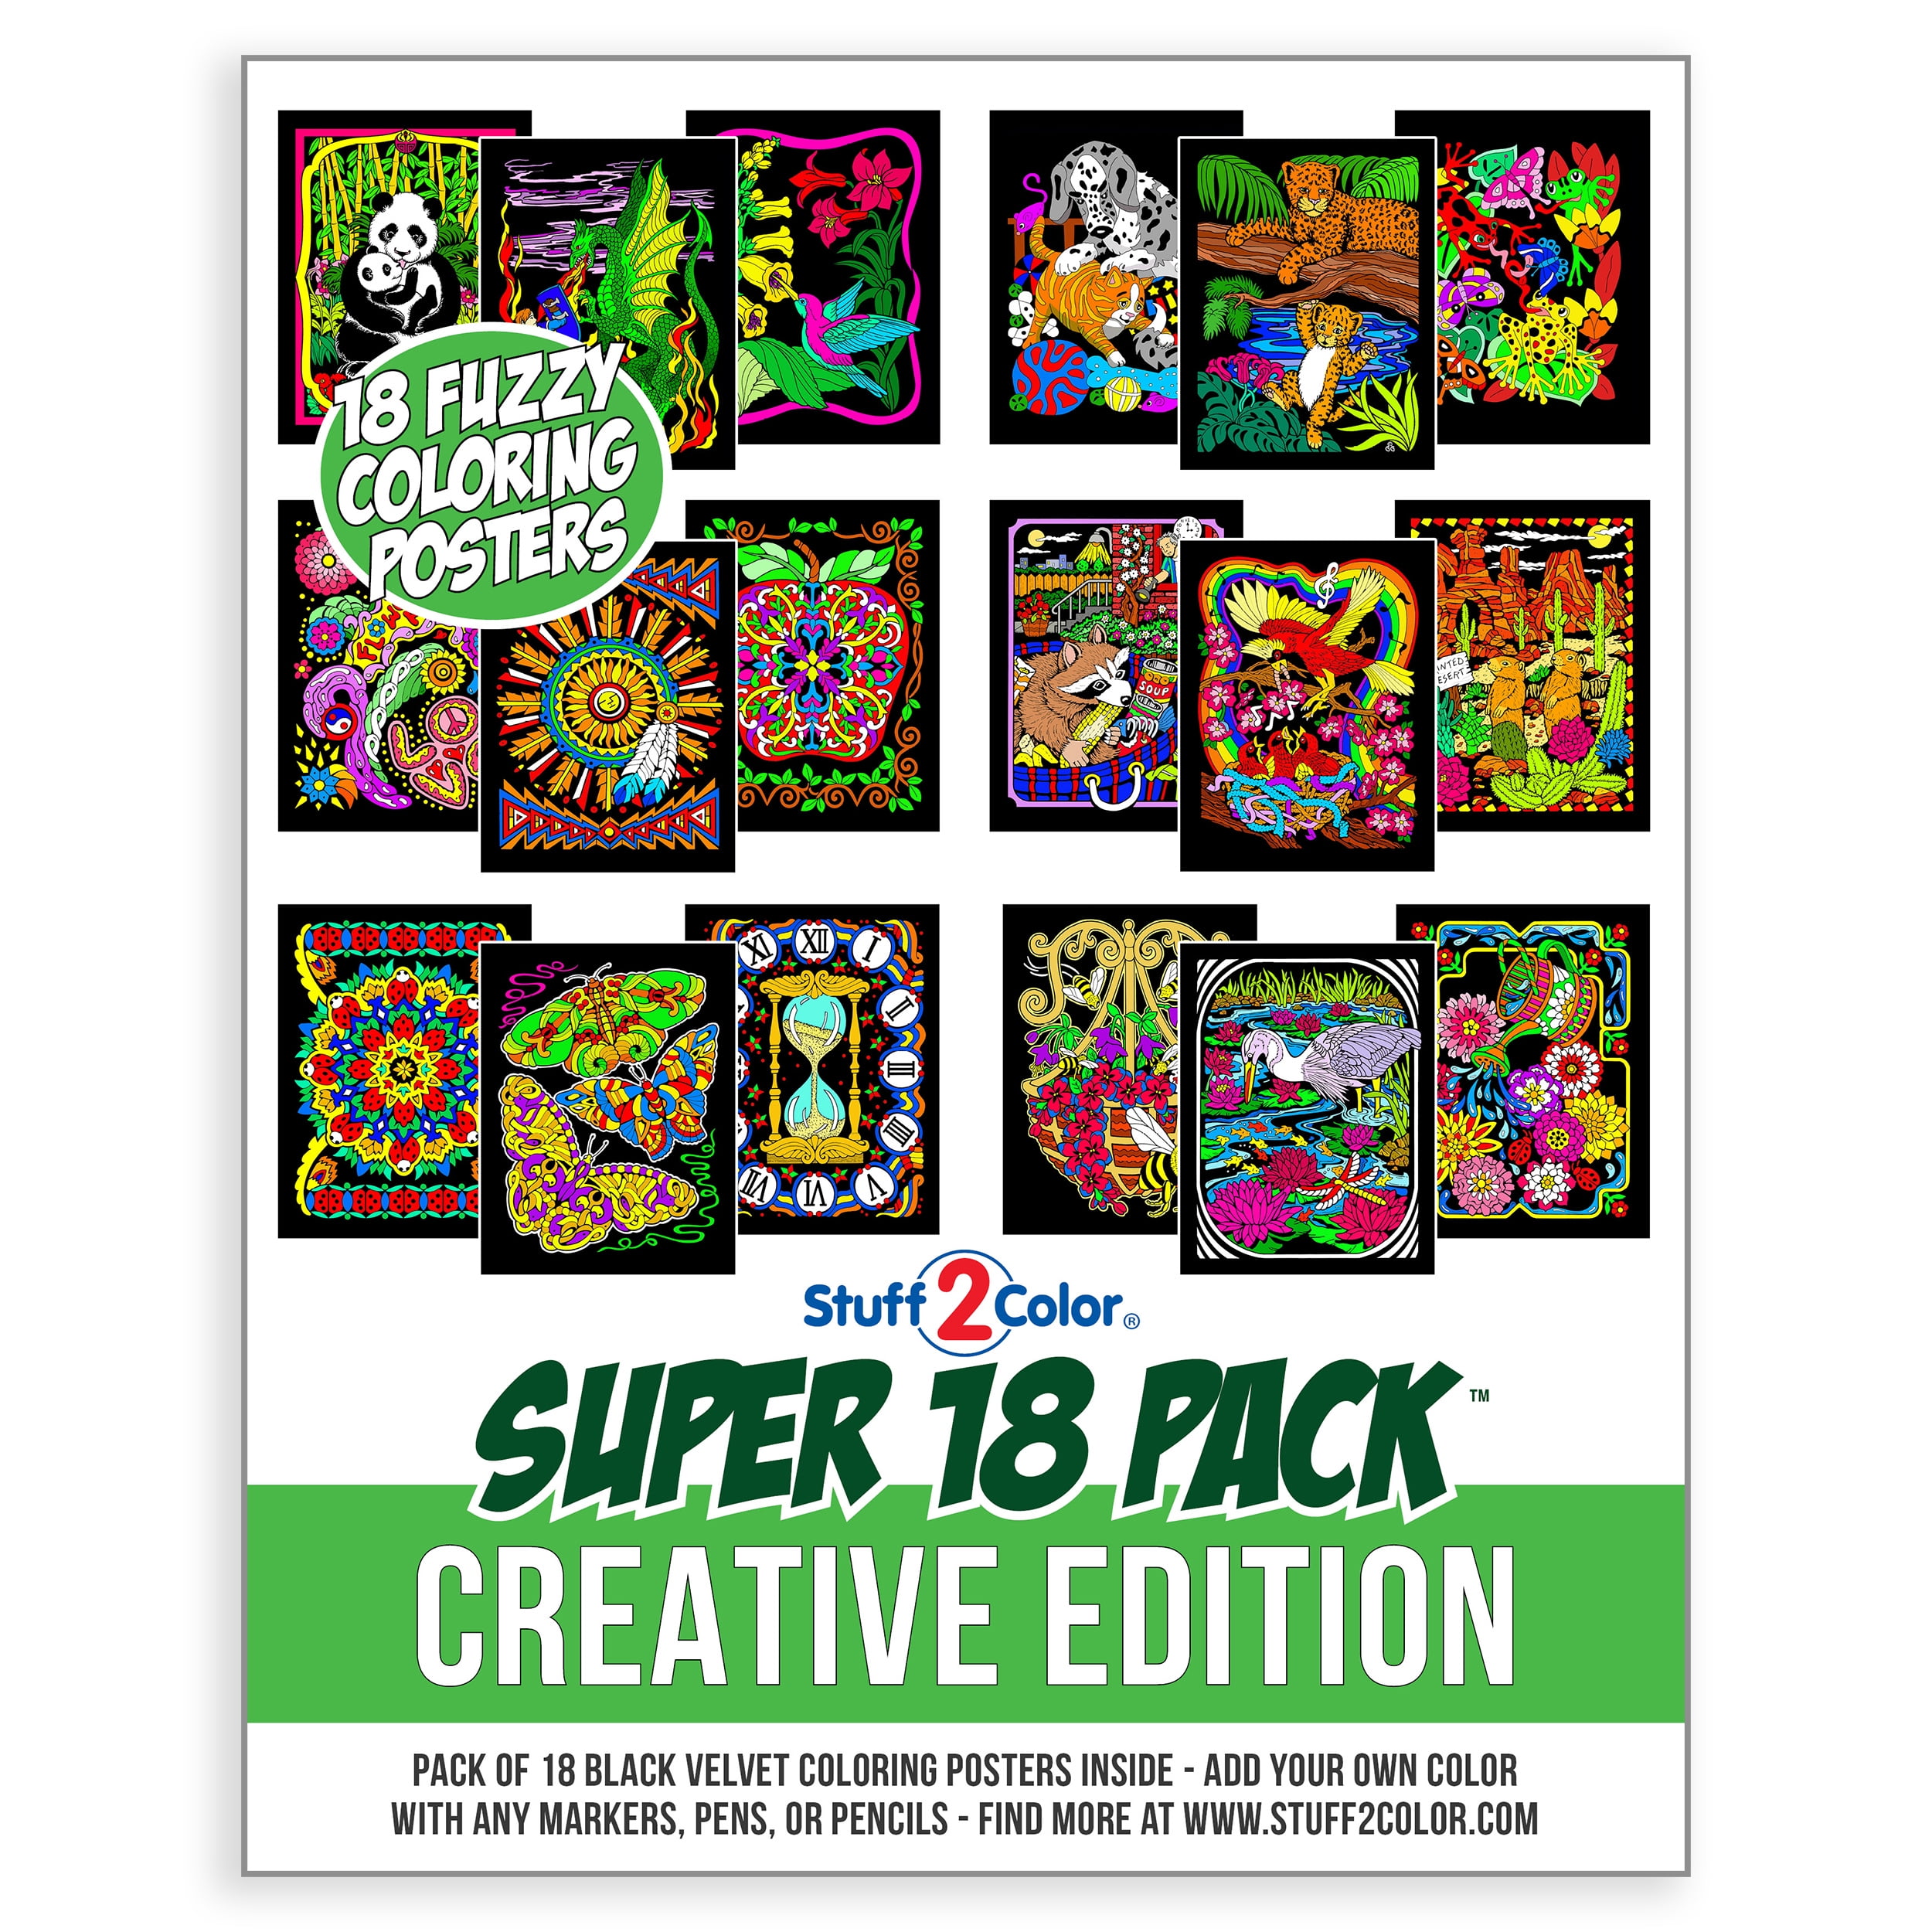 Super Pack of 18 Fuzzy Velvet Coloring Posters (Creative Edition) -  Stuff2Color 